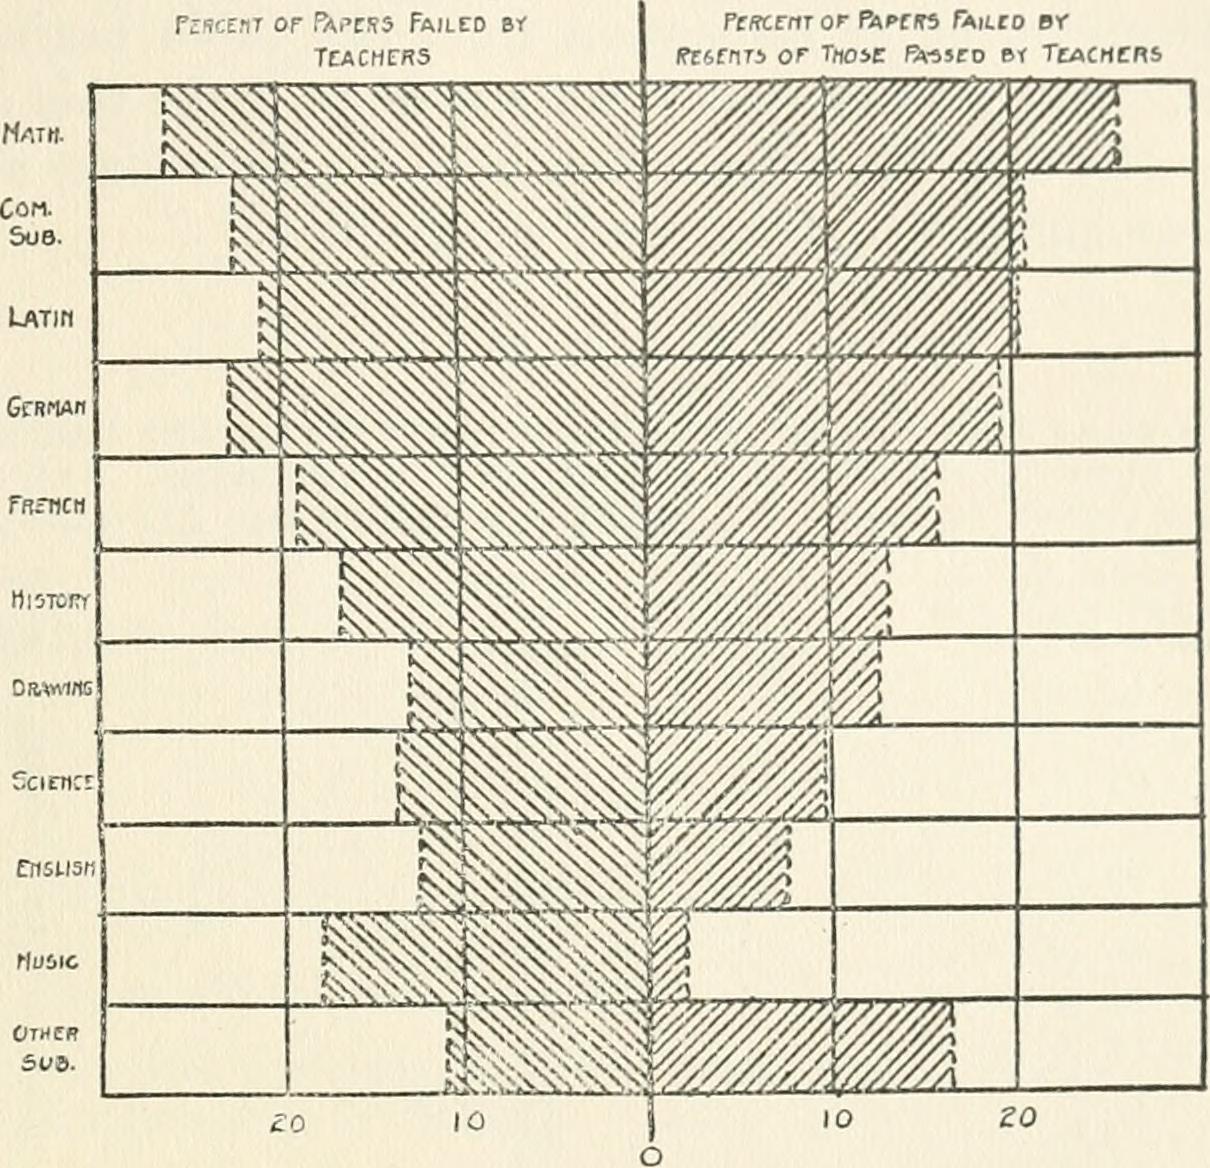 Image from page 70 of "Teachers' marks; their variability and standardization" (1914)